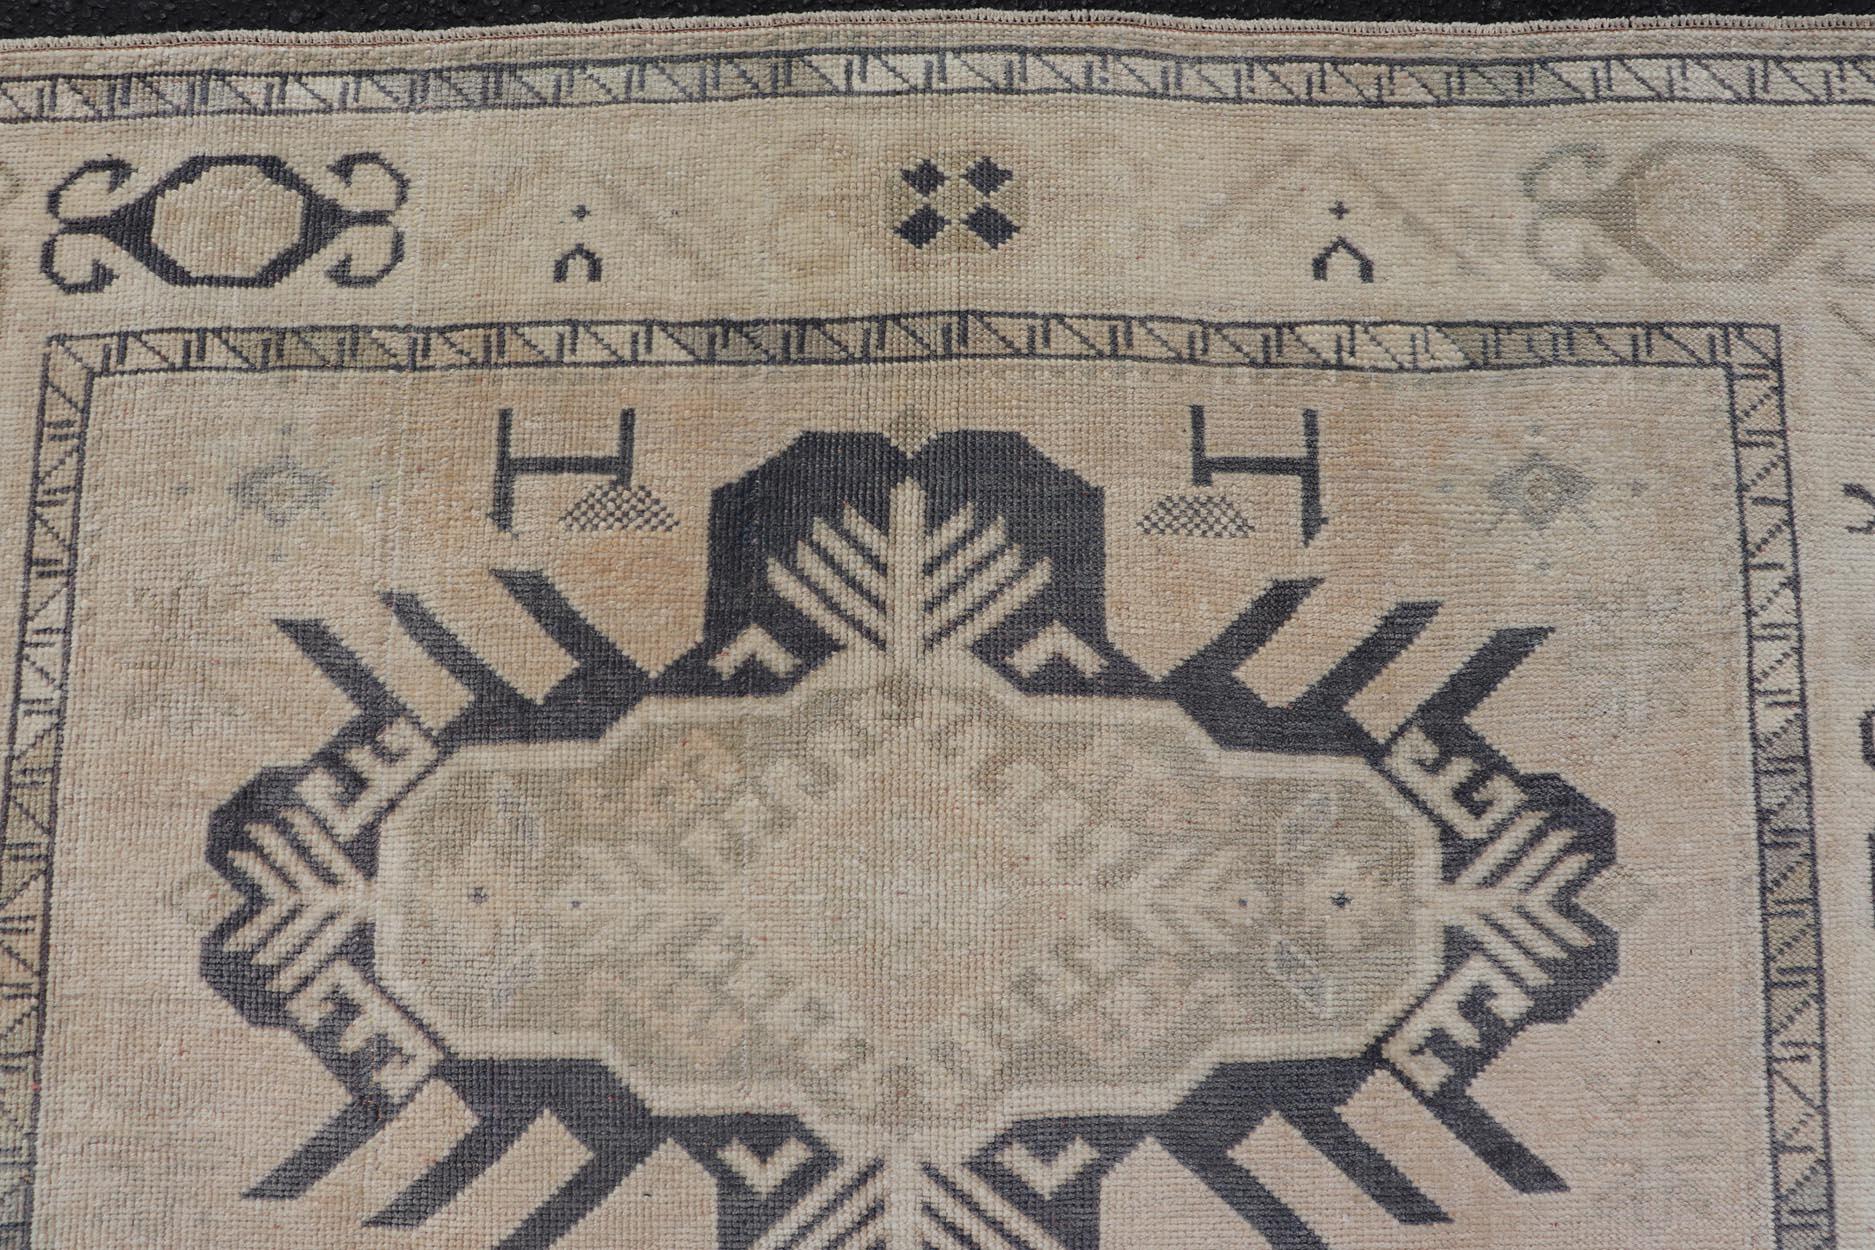 Vintage Oushak Rug from Turkey with Navy Blue and Floral Medallion's. Keivan Woven Arts / rug/EN-13264, country of origin / type: Turkey / Oushak, circa 1950.
Measures: 4'7 x 7'0 
This vintage Turkish Oushak rug features a faint, etched medallion